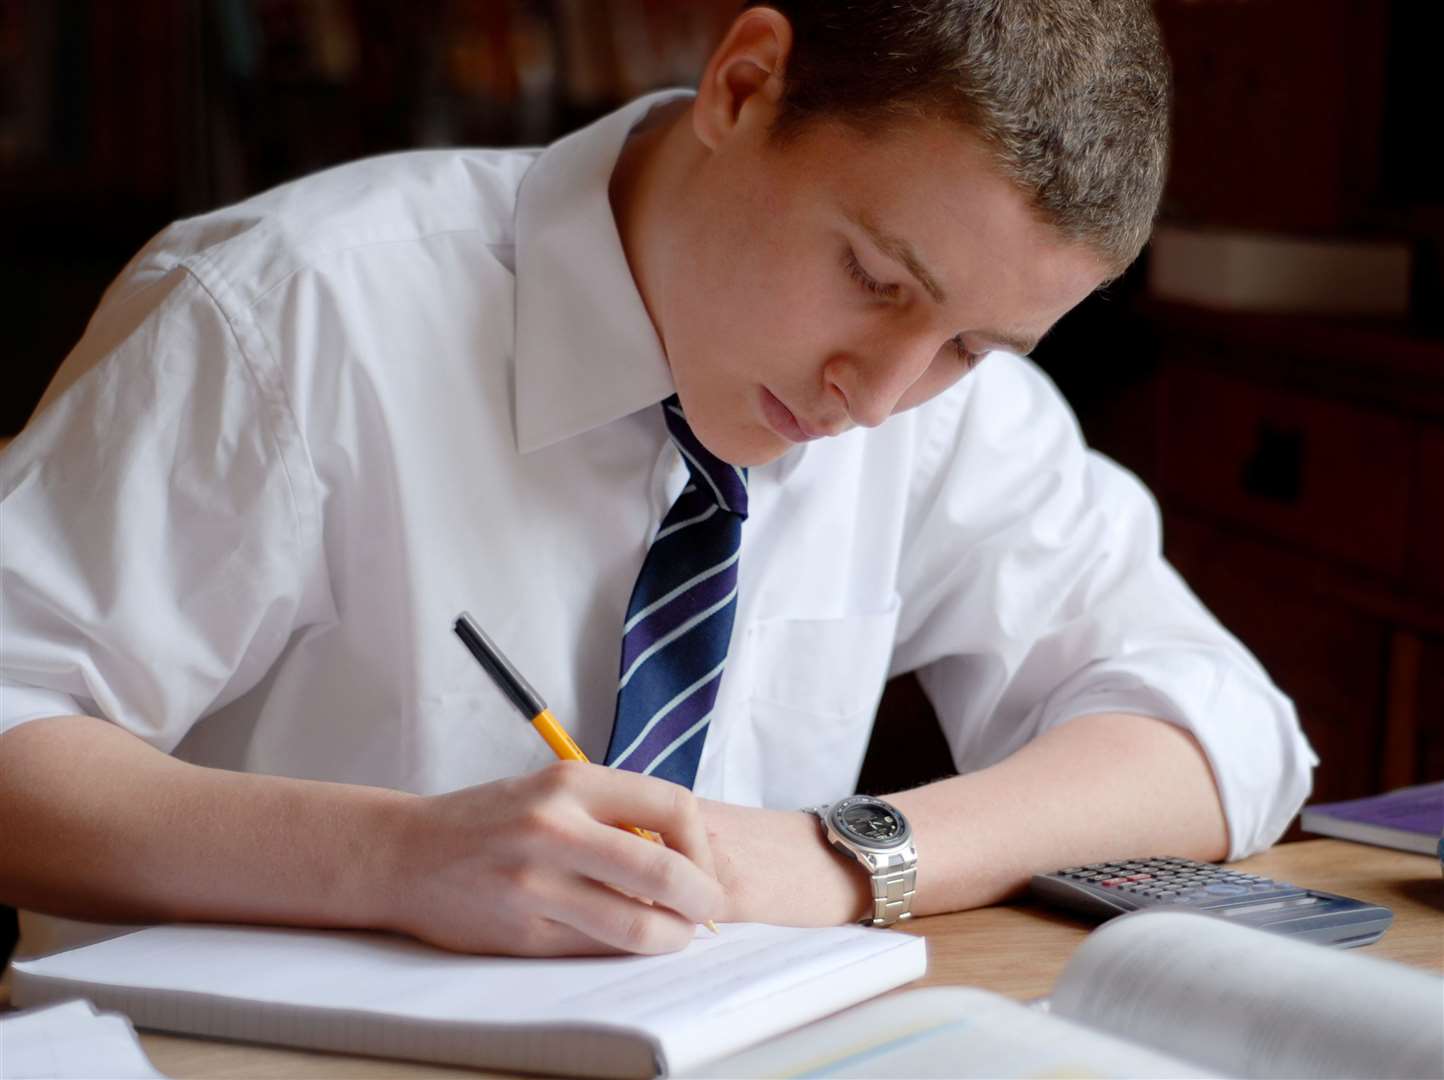 There is a high demand on grammar school places on Kent. Photo: istock